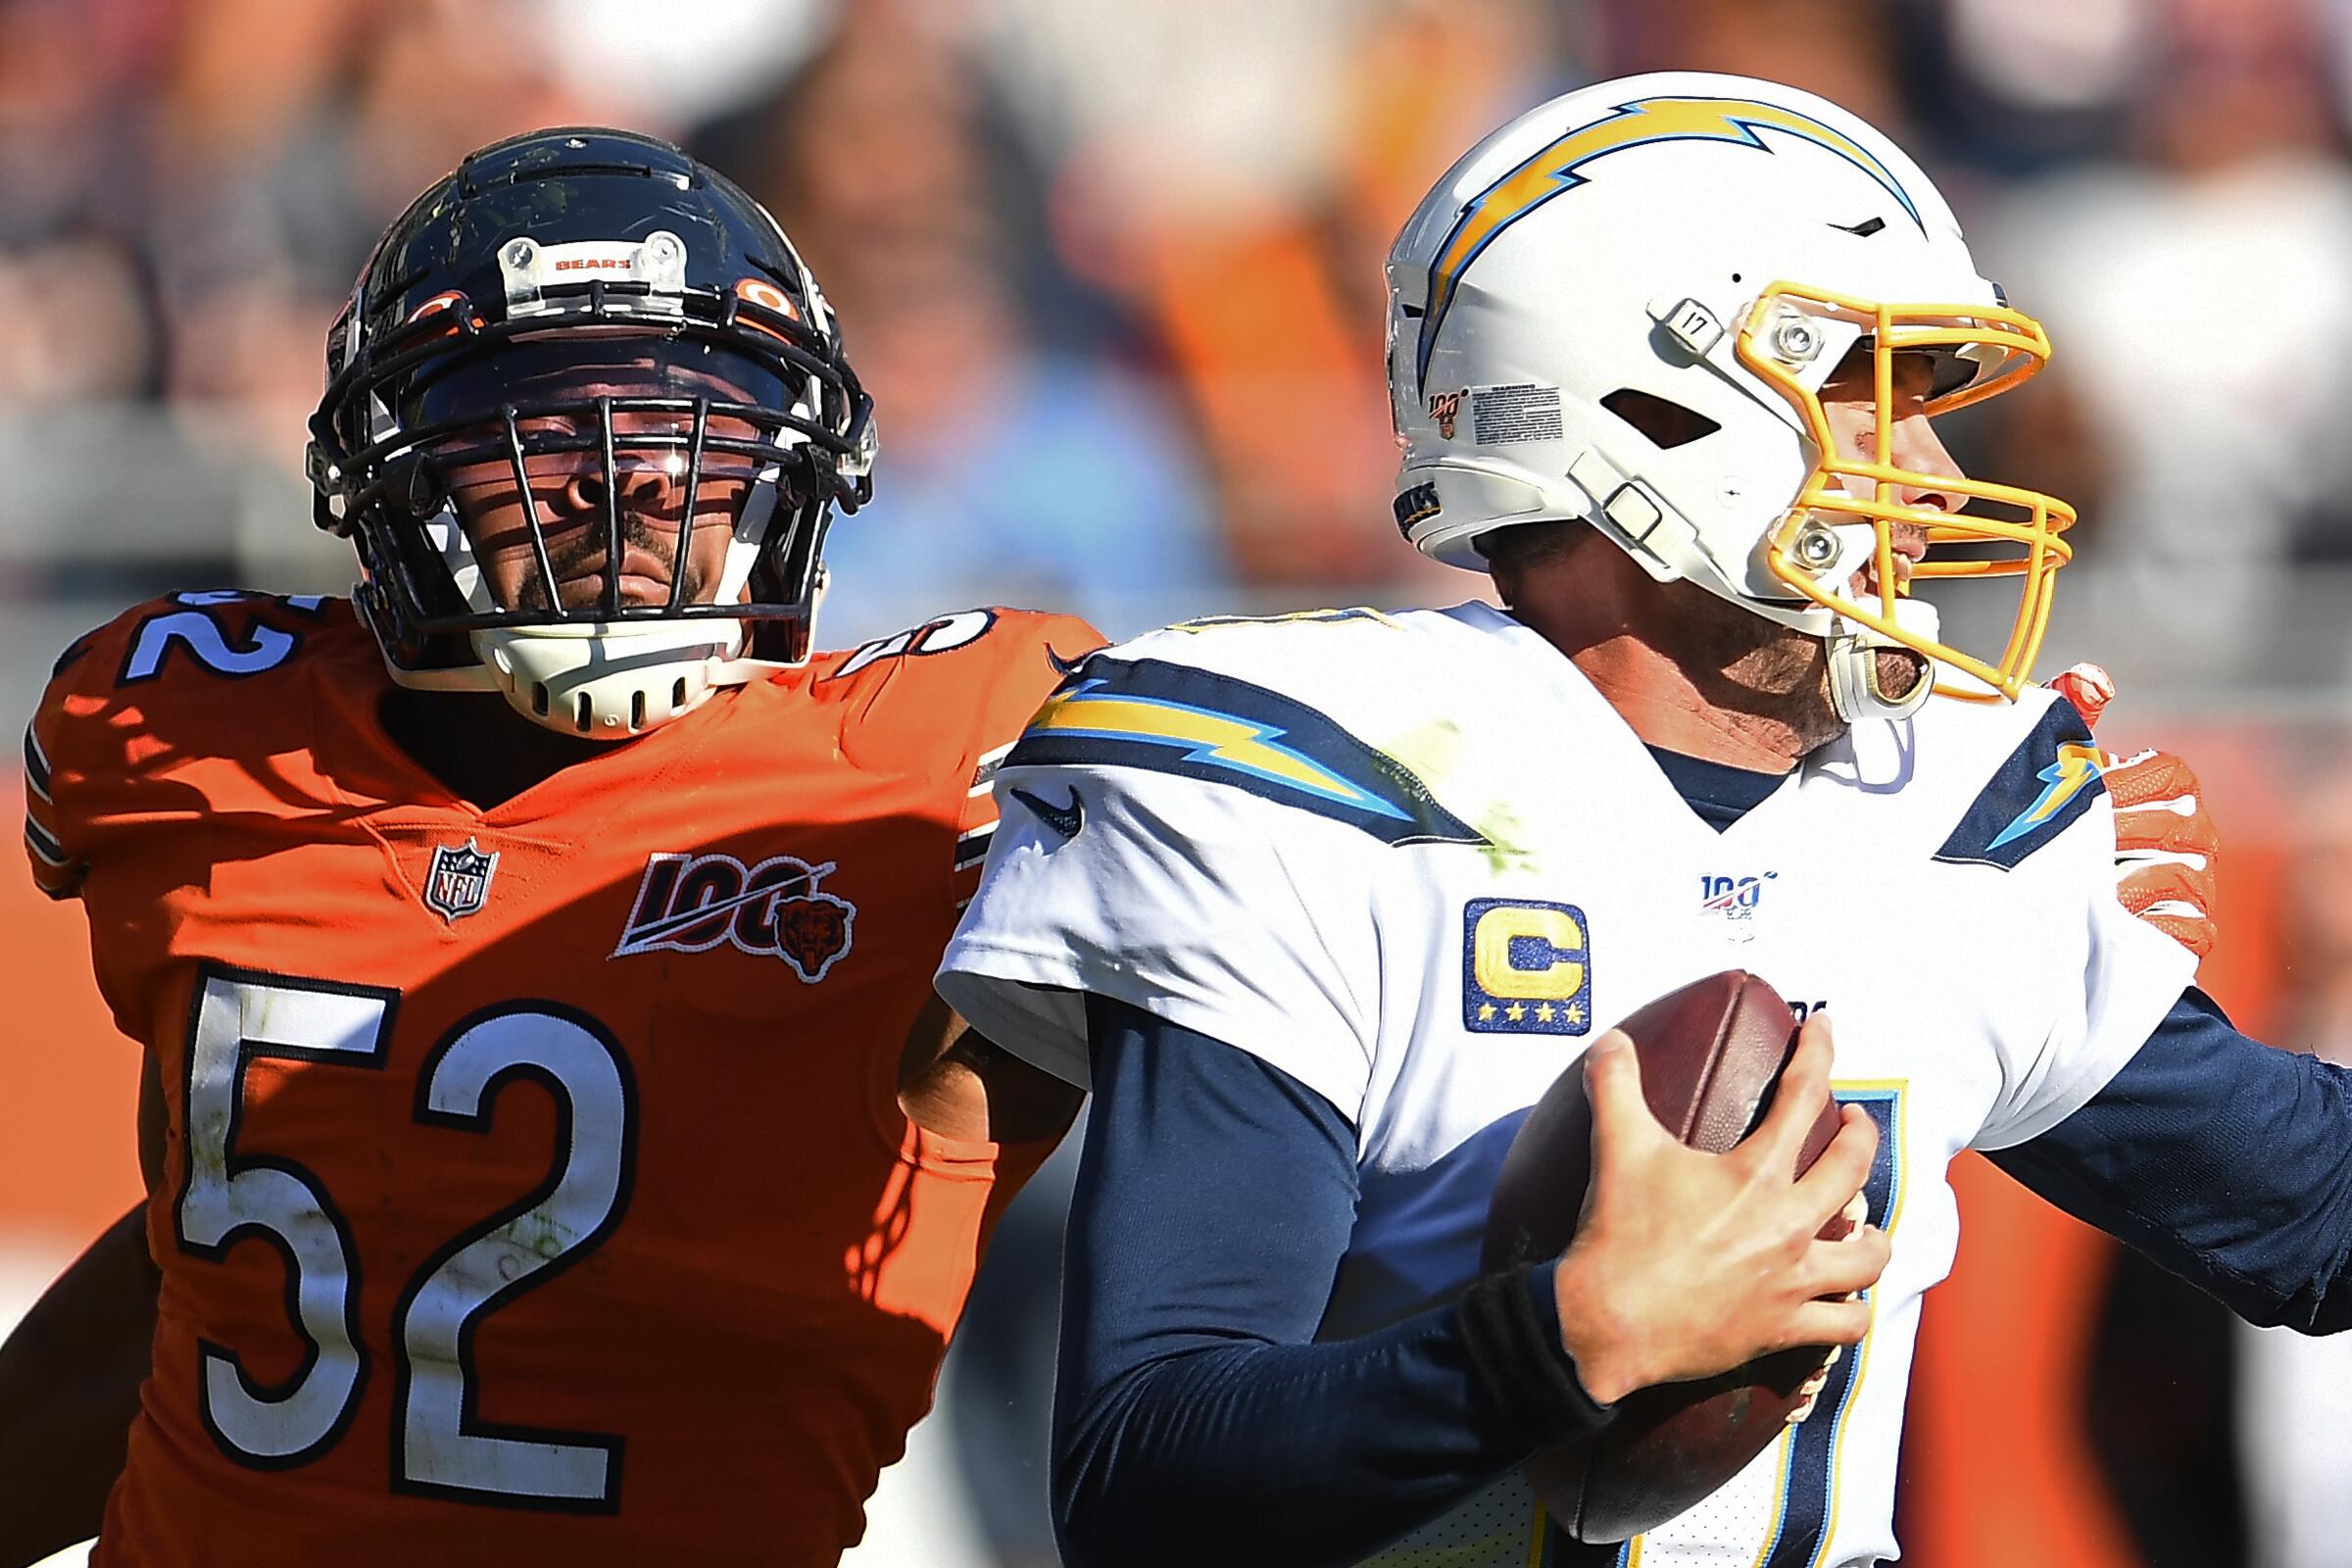 The Bears' Khalil Mack (52) pressures Chargers quarterback Philip Rivers in 2019.